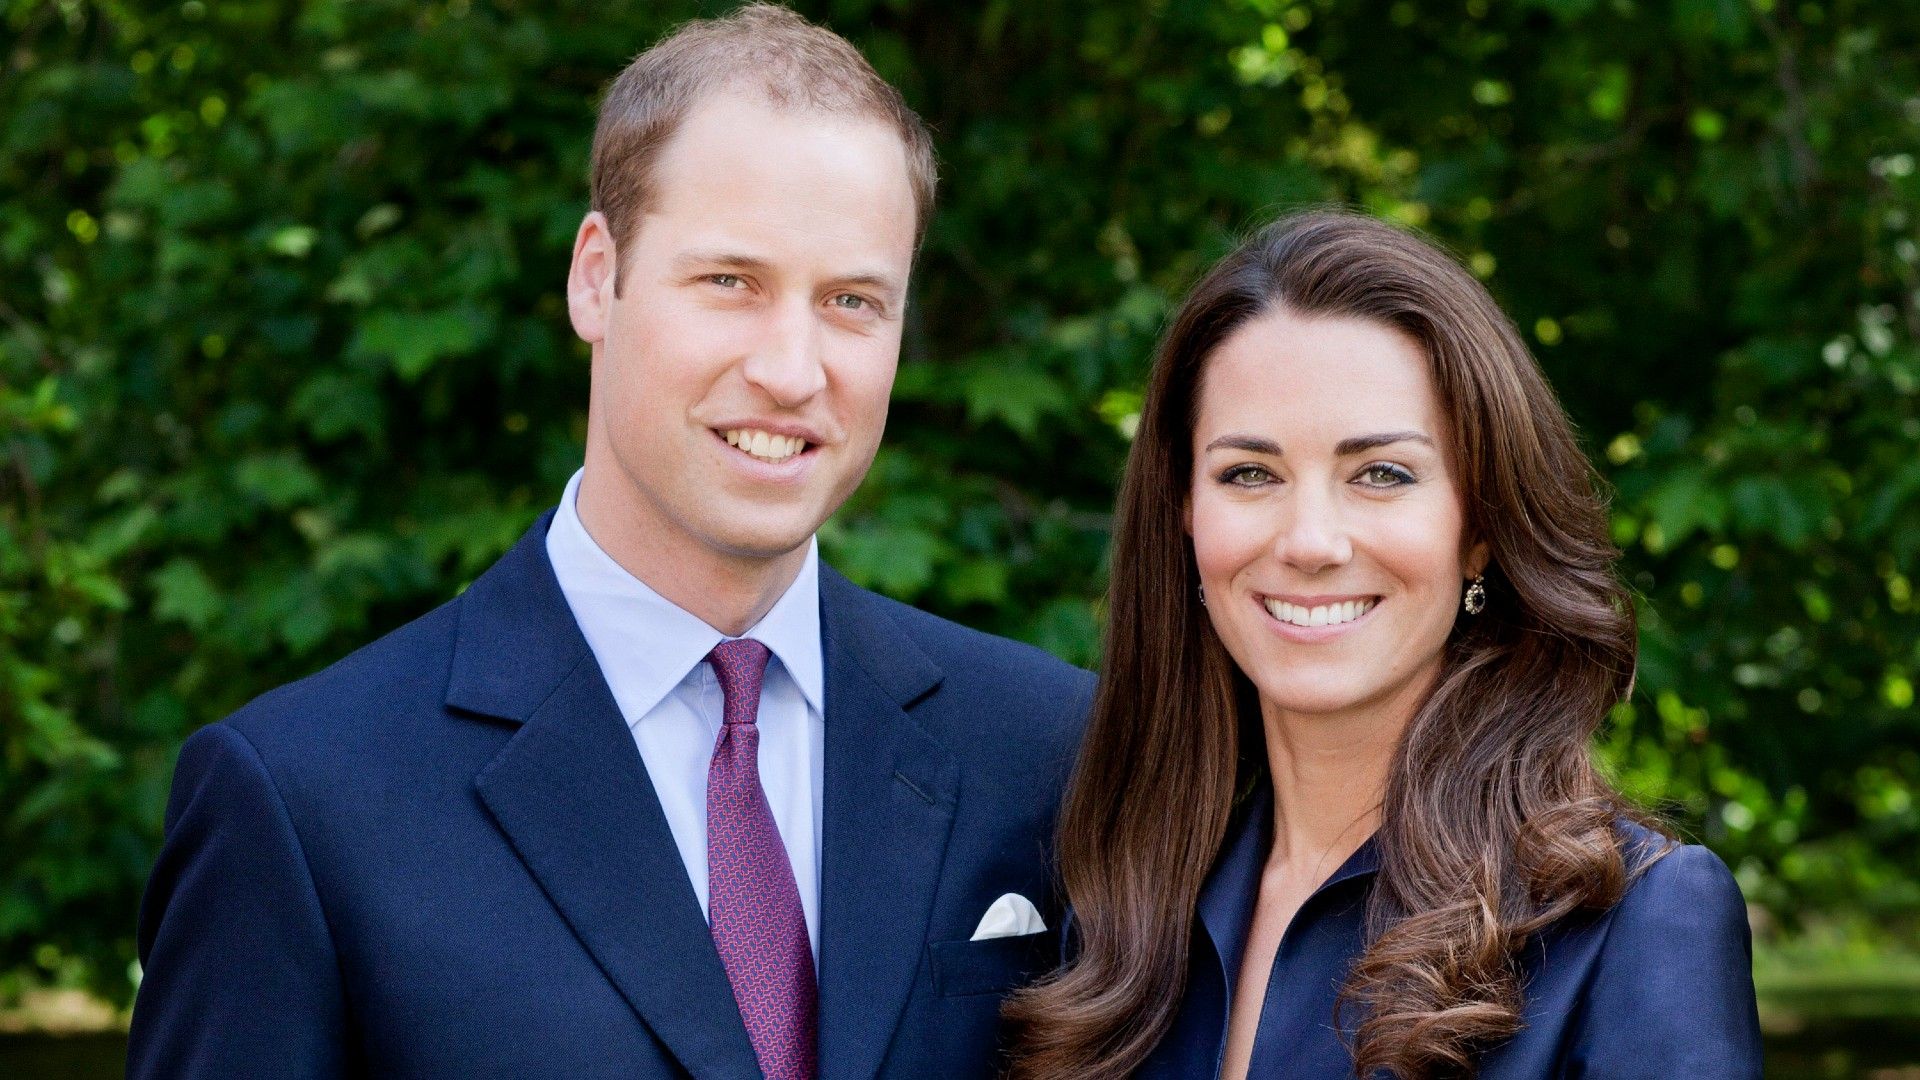 <p>                     In 2011, just a few months after their magnificent April wedding, Prince William and Kate Middleton undertook their first official overseas joint tour.                   </p>                                      <p>                     The pair marked the historic occasion with a brand new portrait of the newlyweds, in matching navy outfits.                   </p>                                      <p>                     Not only was it their first joint tour, it was Kate's first-ever tour as an official royal.                   </p>                                      <p>                     The couple visited all of Canada's regions during the nine-day tour.                   </p>